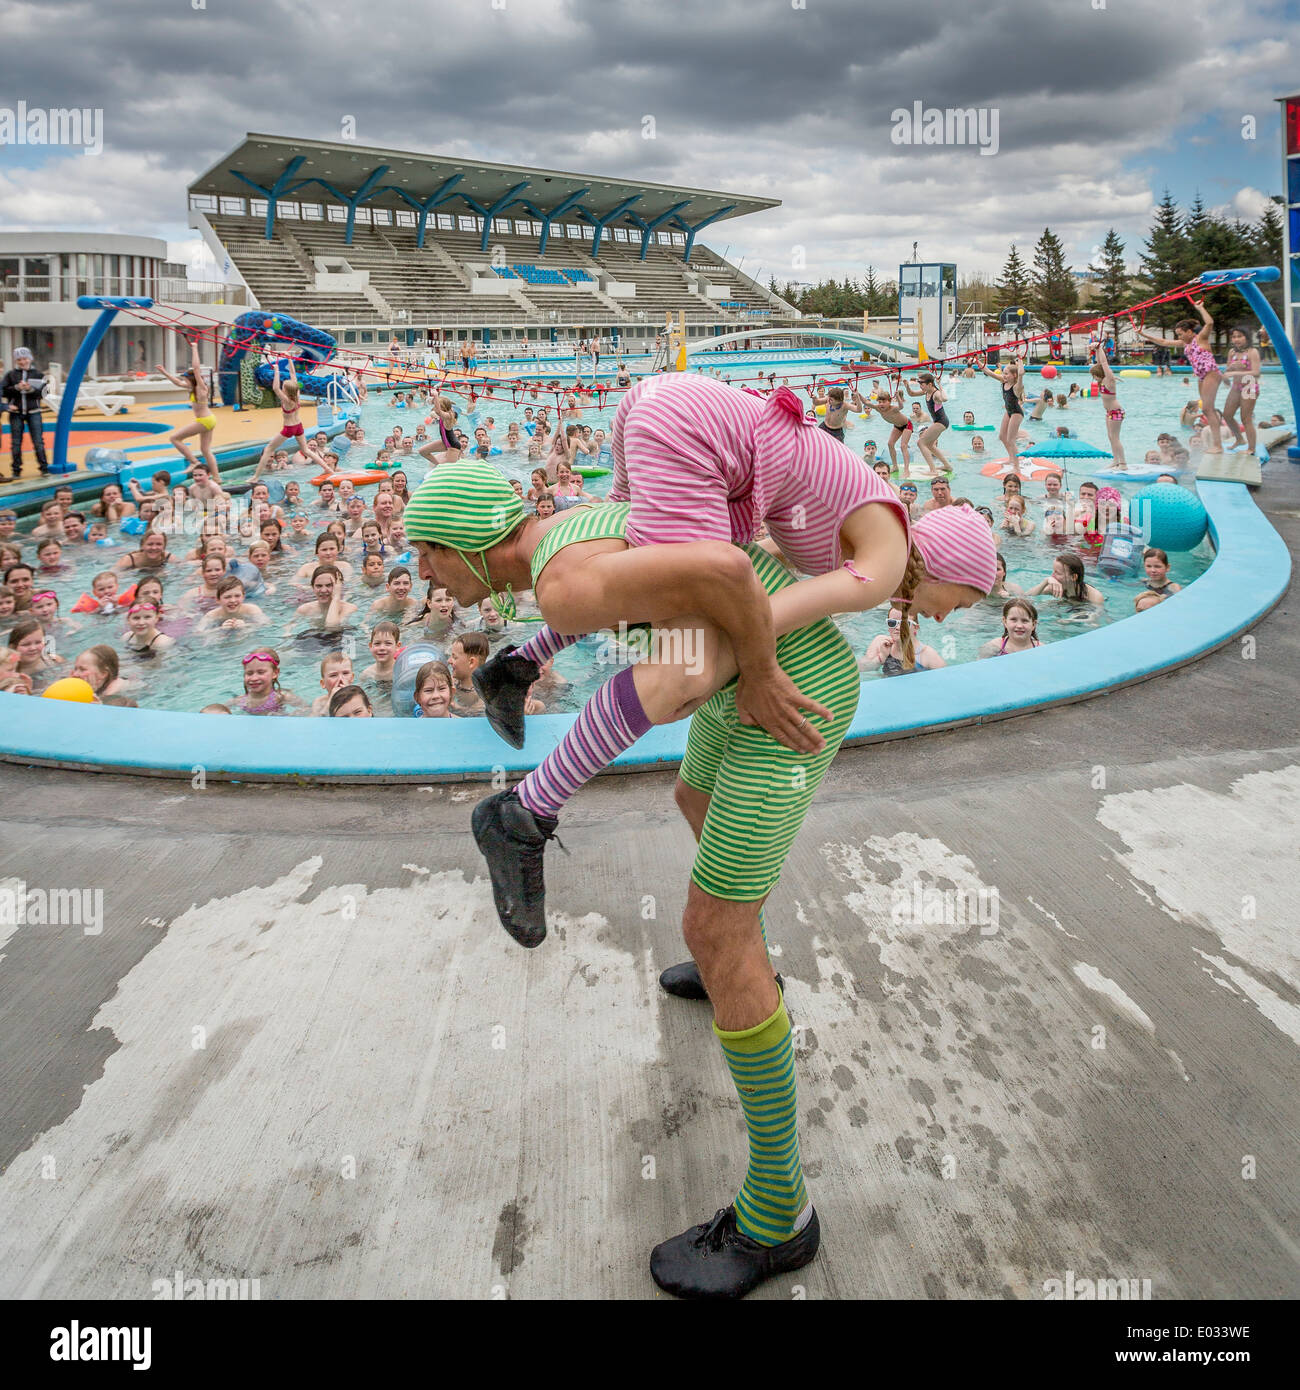 Family fun day at one of the many swimming pools, Reykjavik, Iceland The pools use geothermal energy and are opened all year. Stock Photo